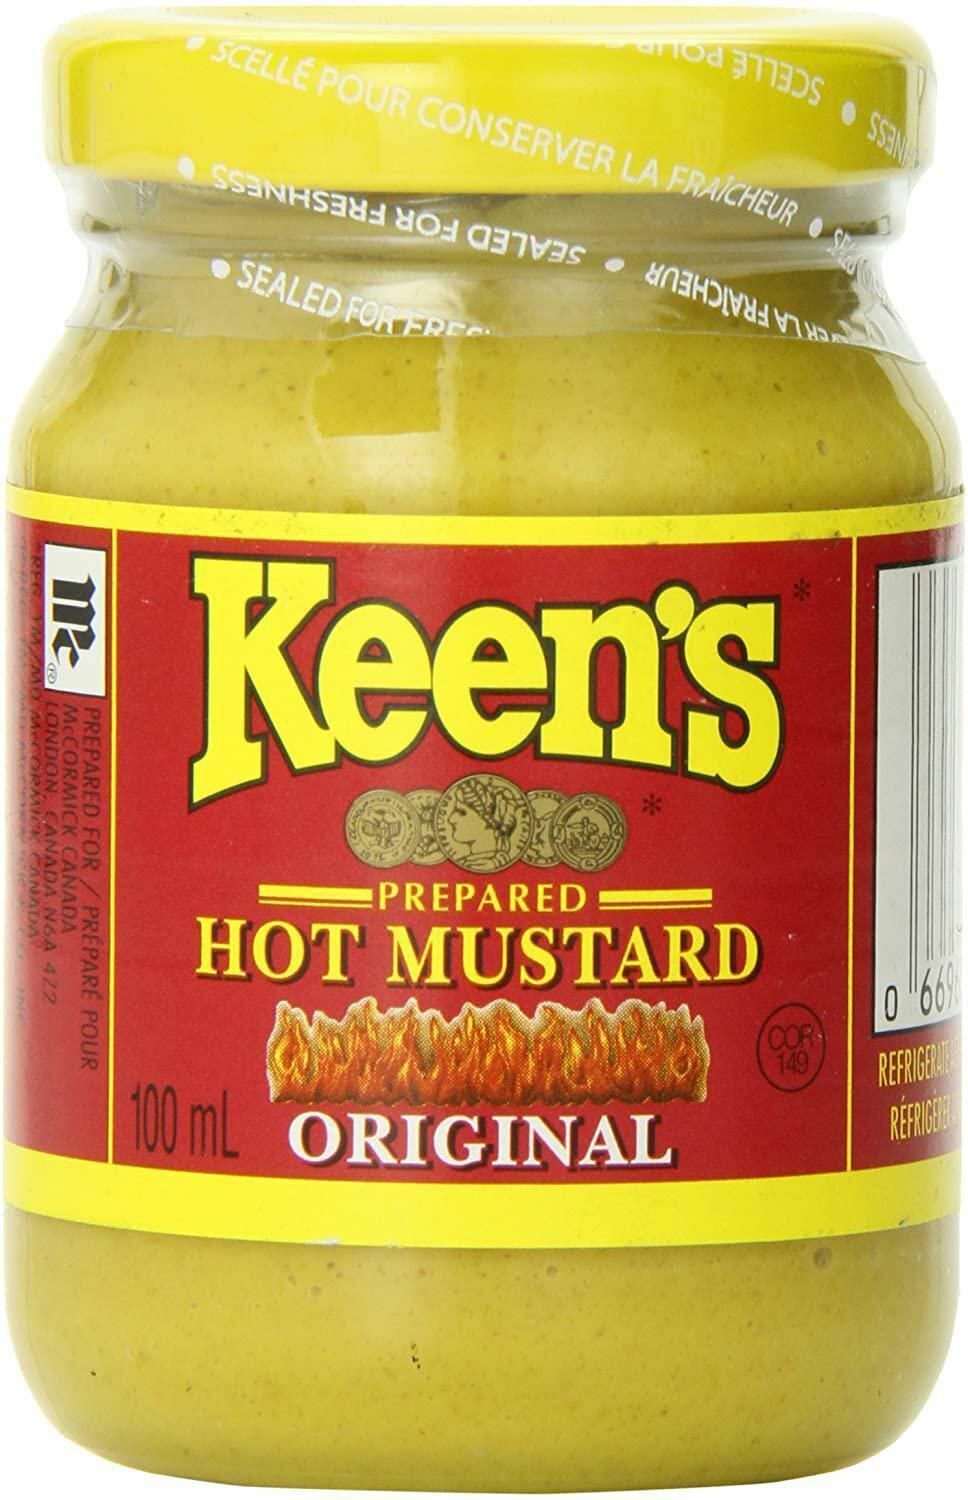 Primary image for 2 Jars Of Keen's Original Prepared Hot mustard 100ml each Canada Free Shipping